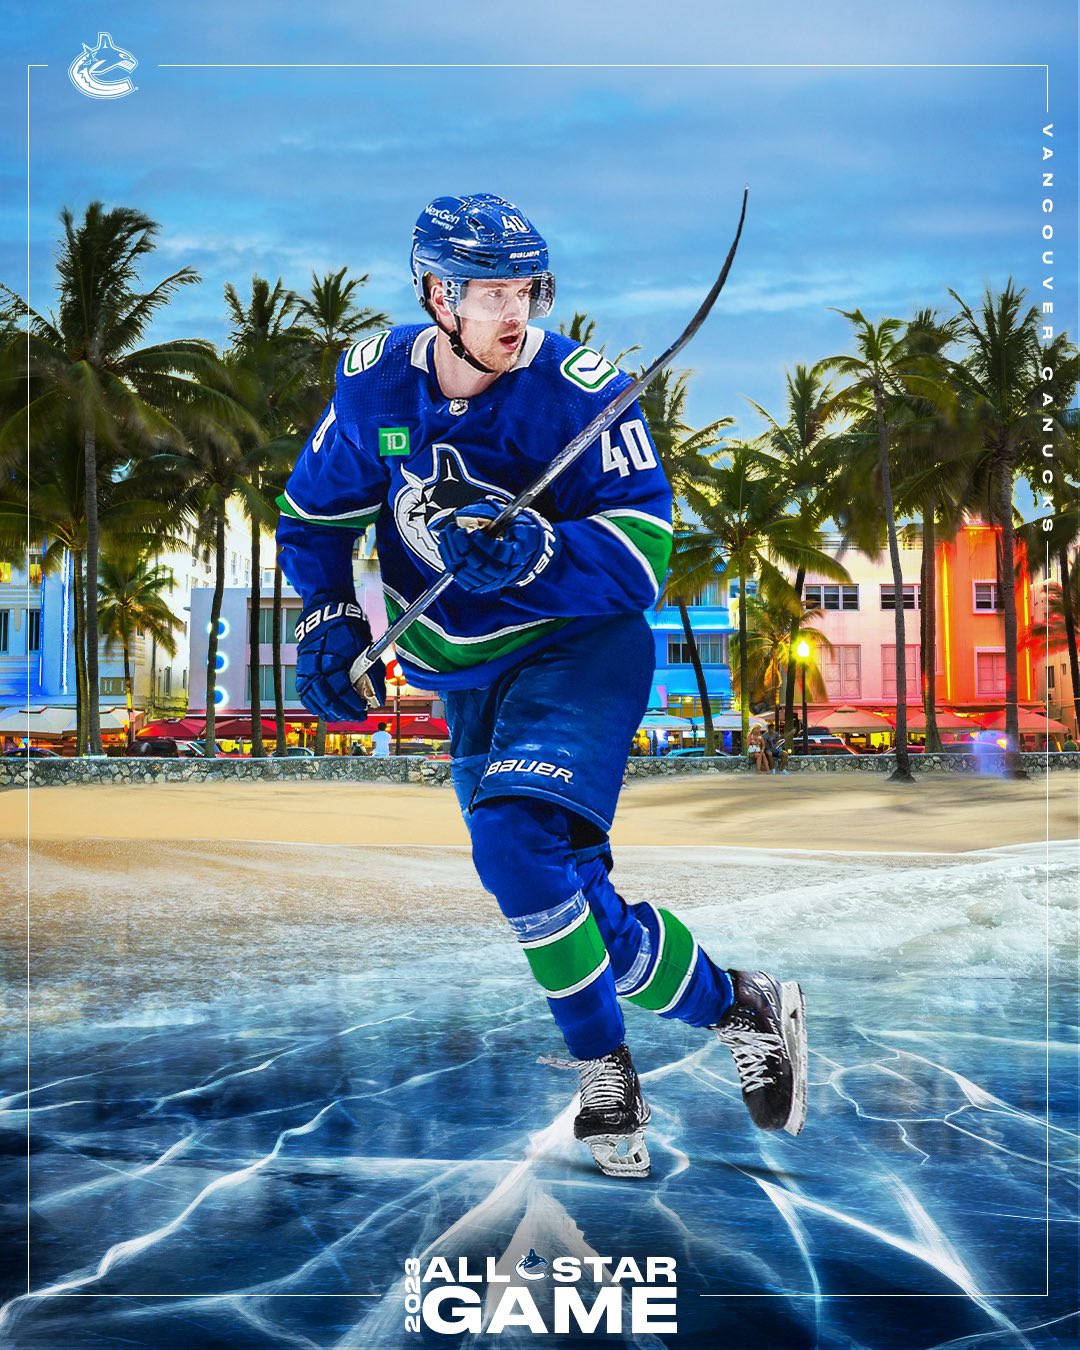 Vancouver Canucks on X